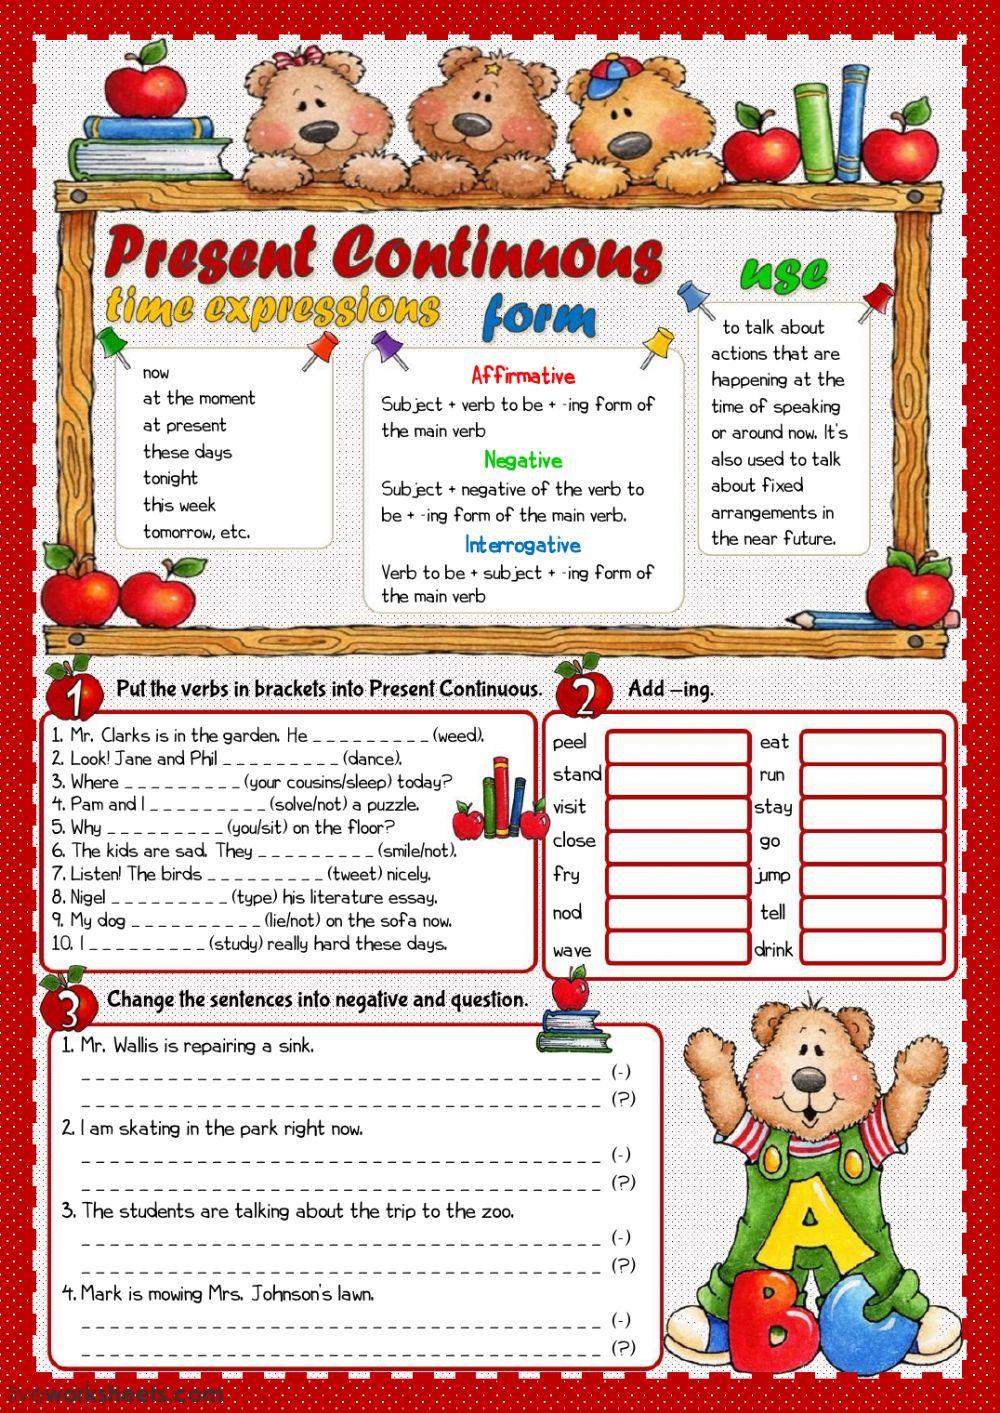 Present Continuous - grammar guide and practice